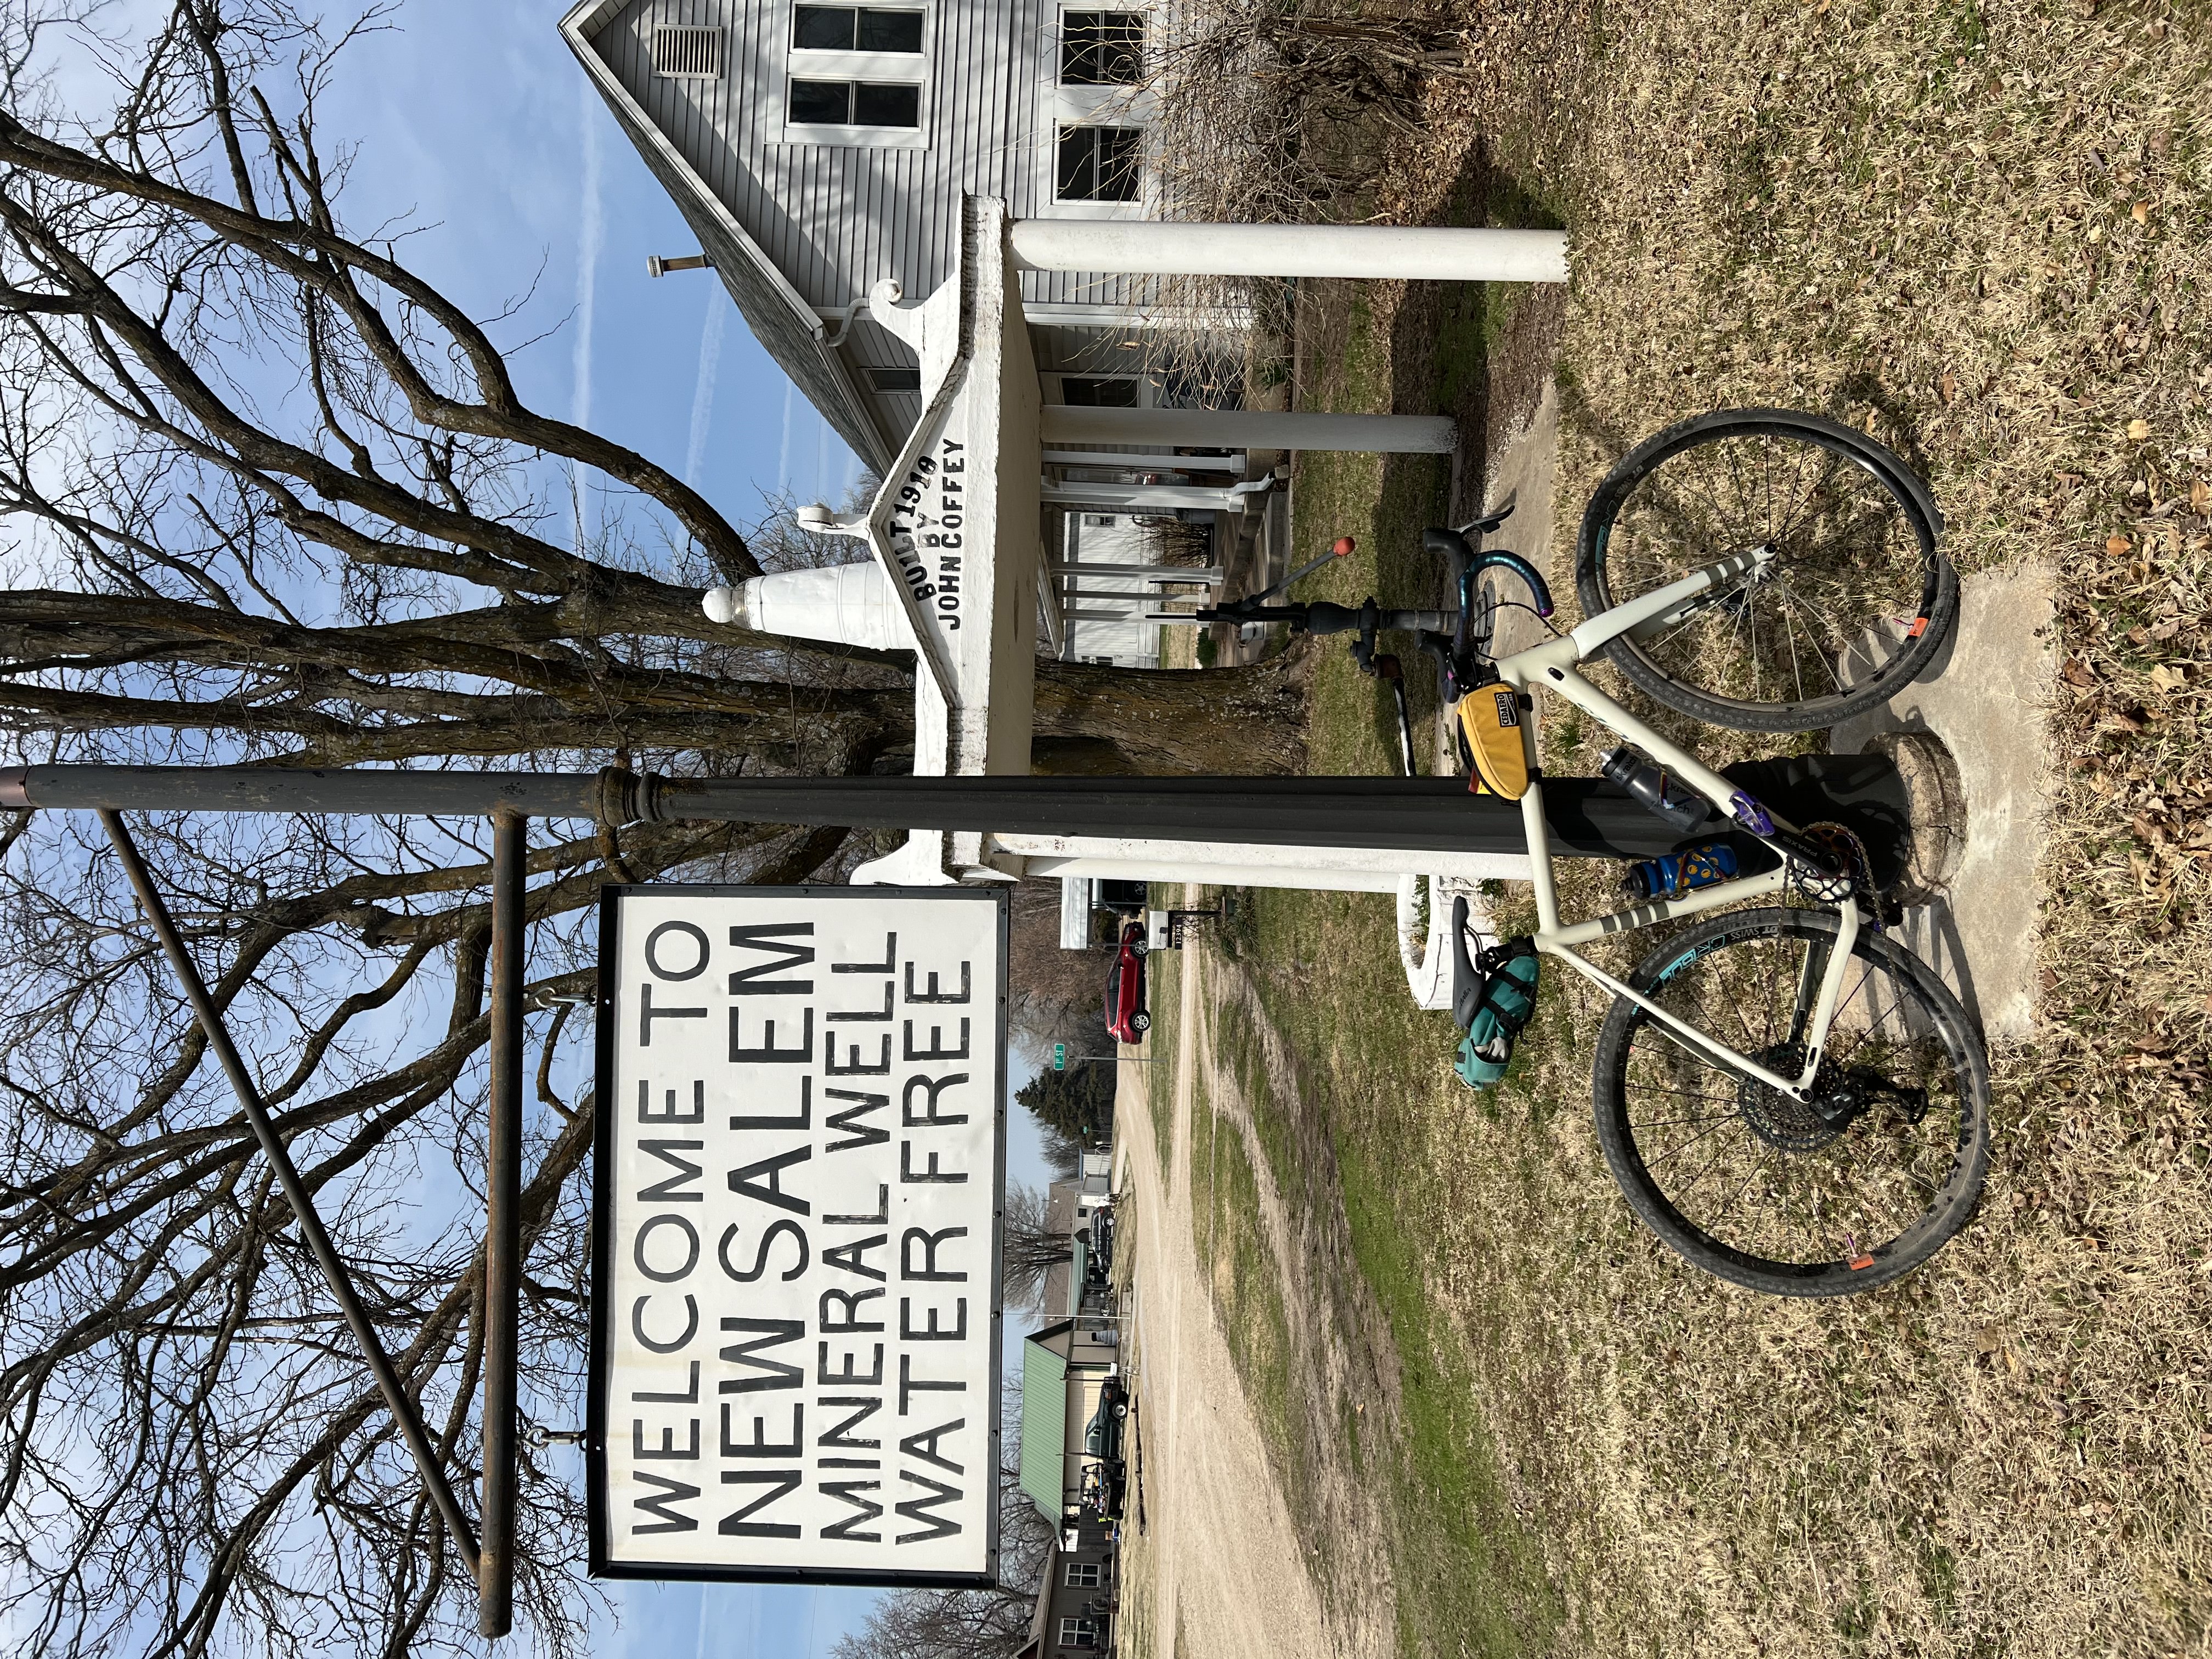 Ride from Winfield to New Salem and back